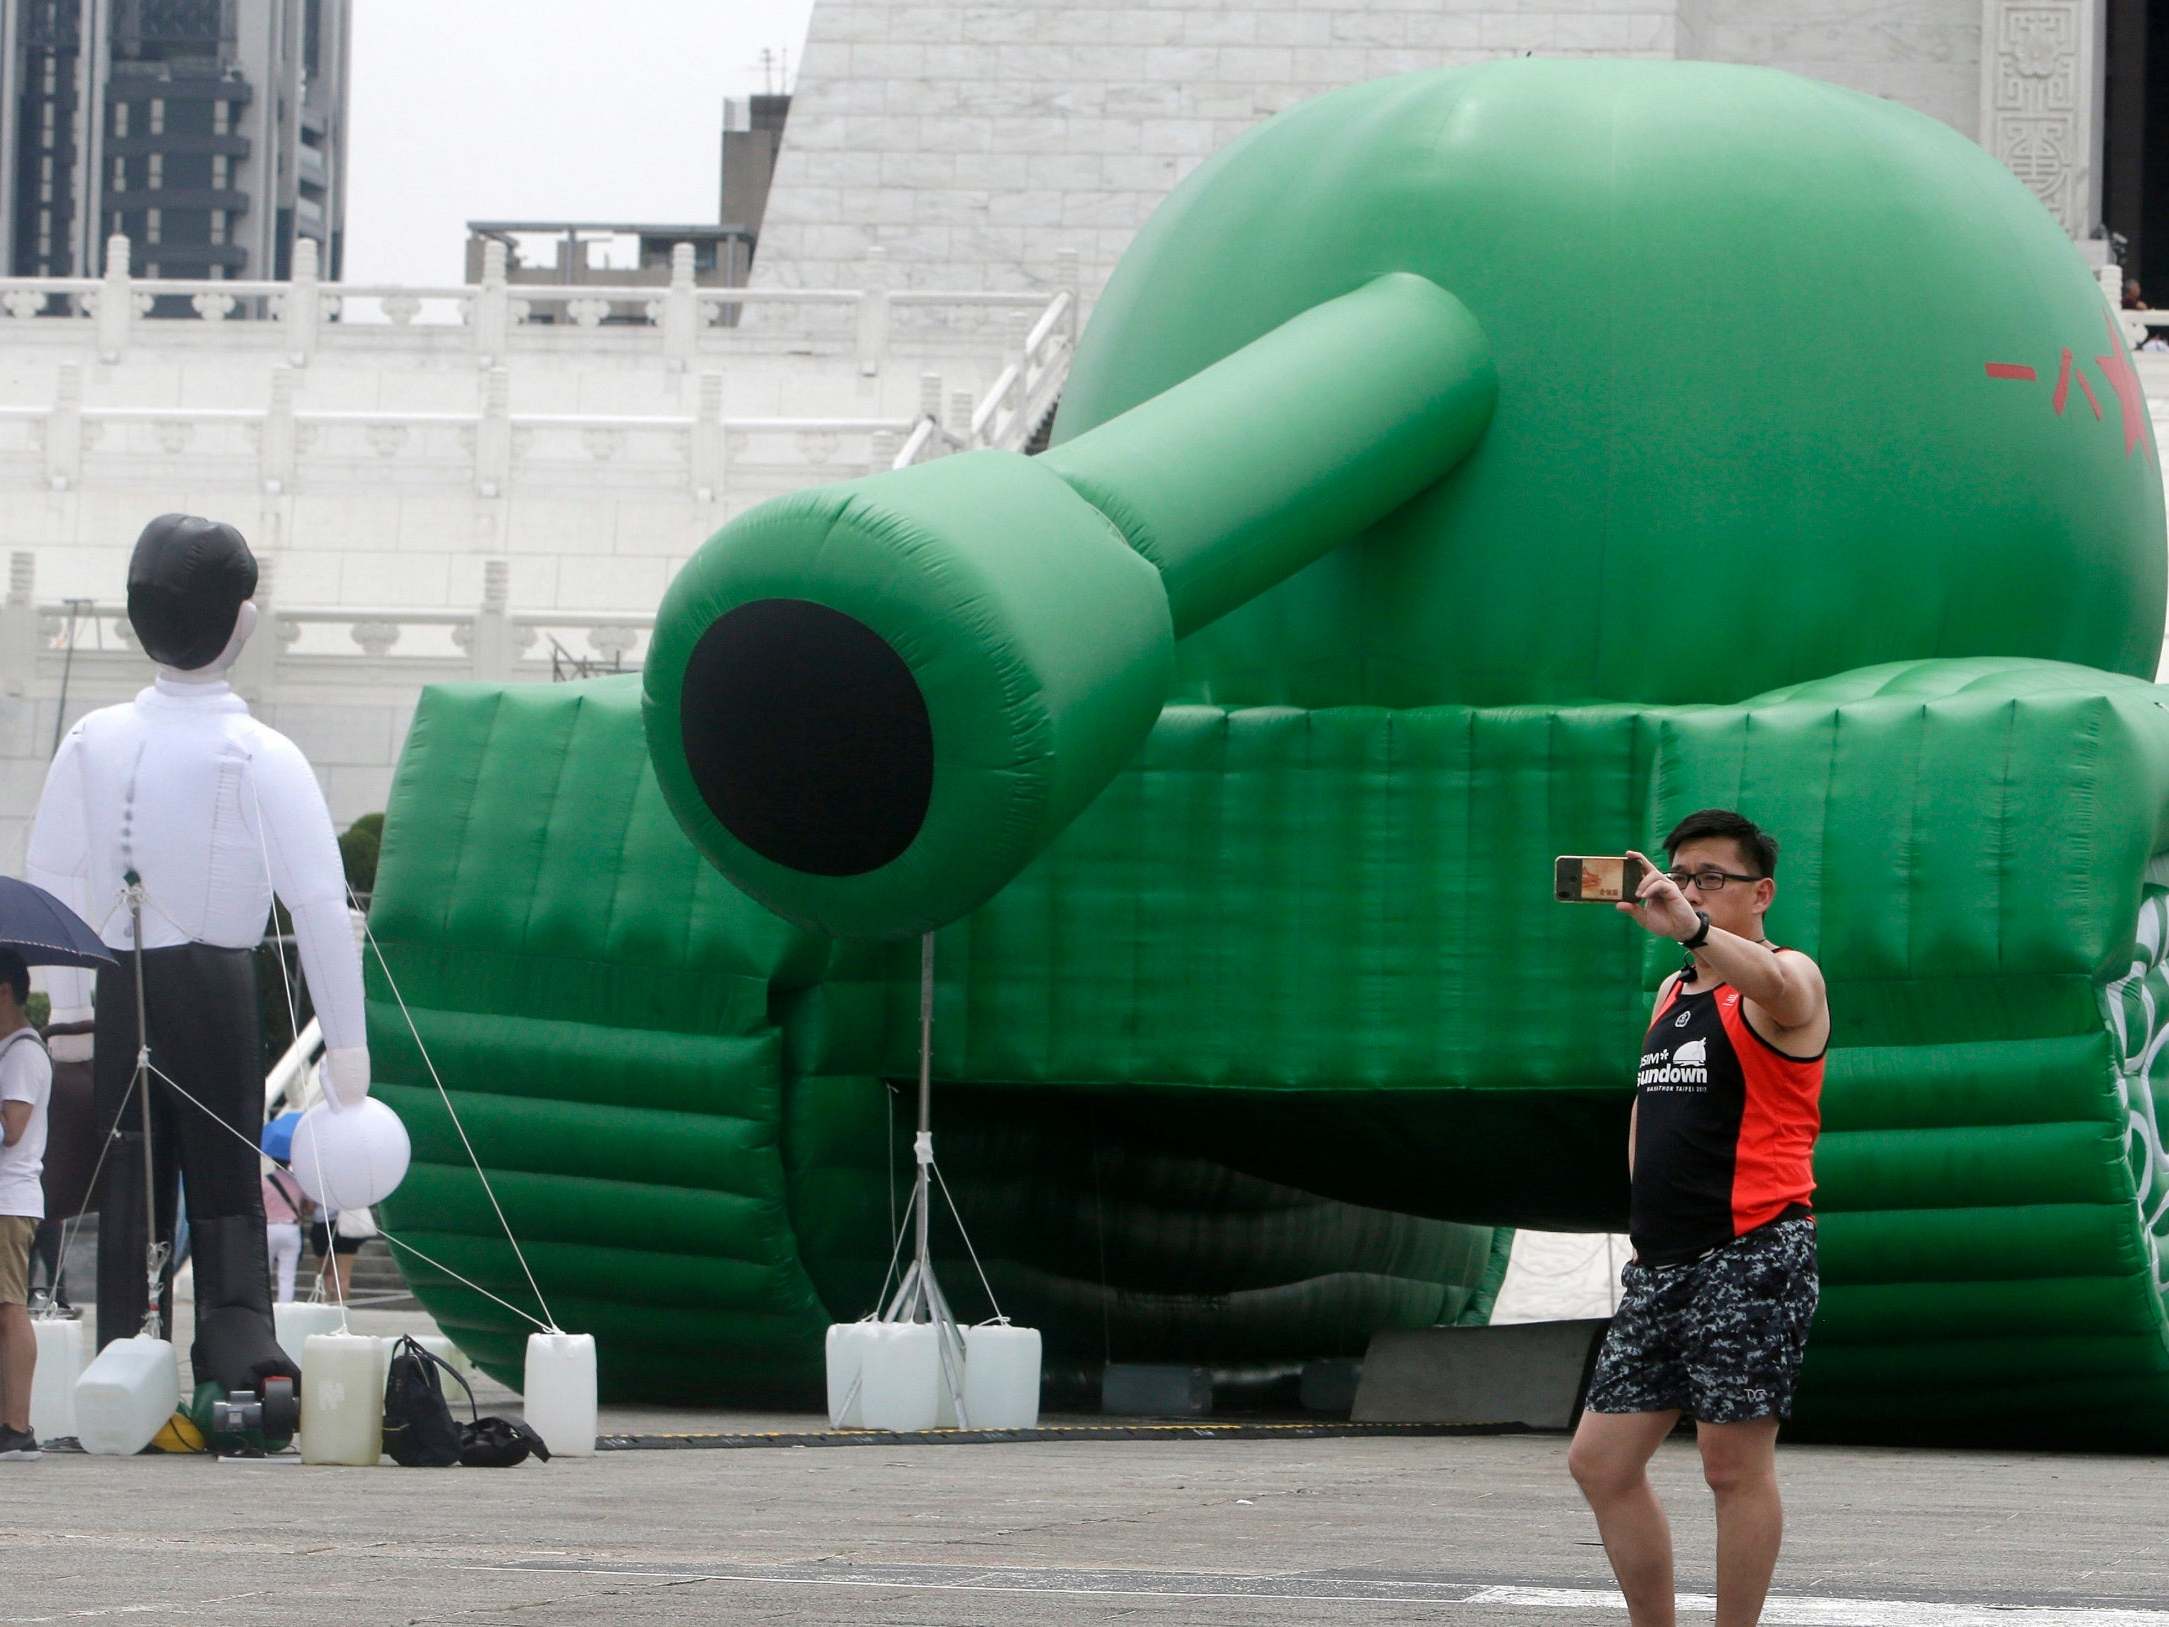 Taiwanese man takes a selfie with an inflatable tank installation in Taipei square